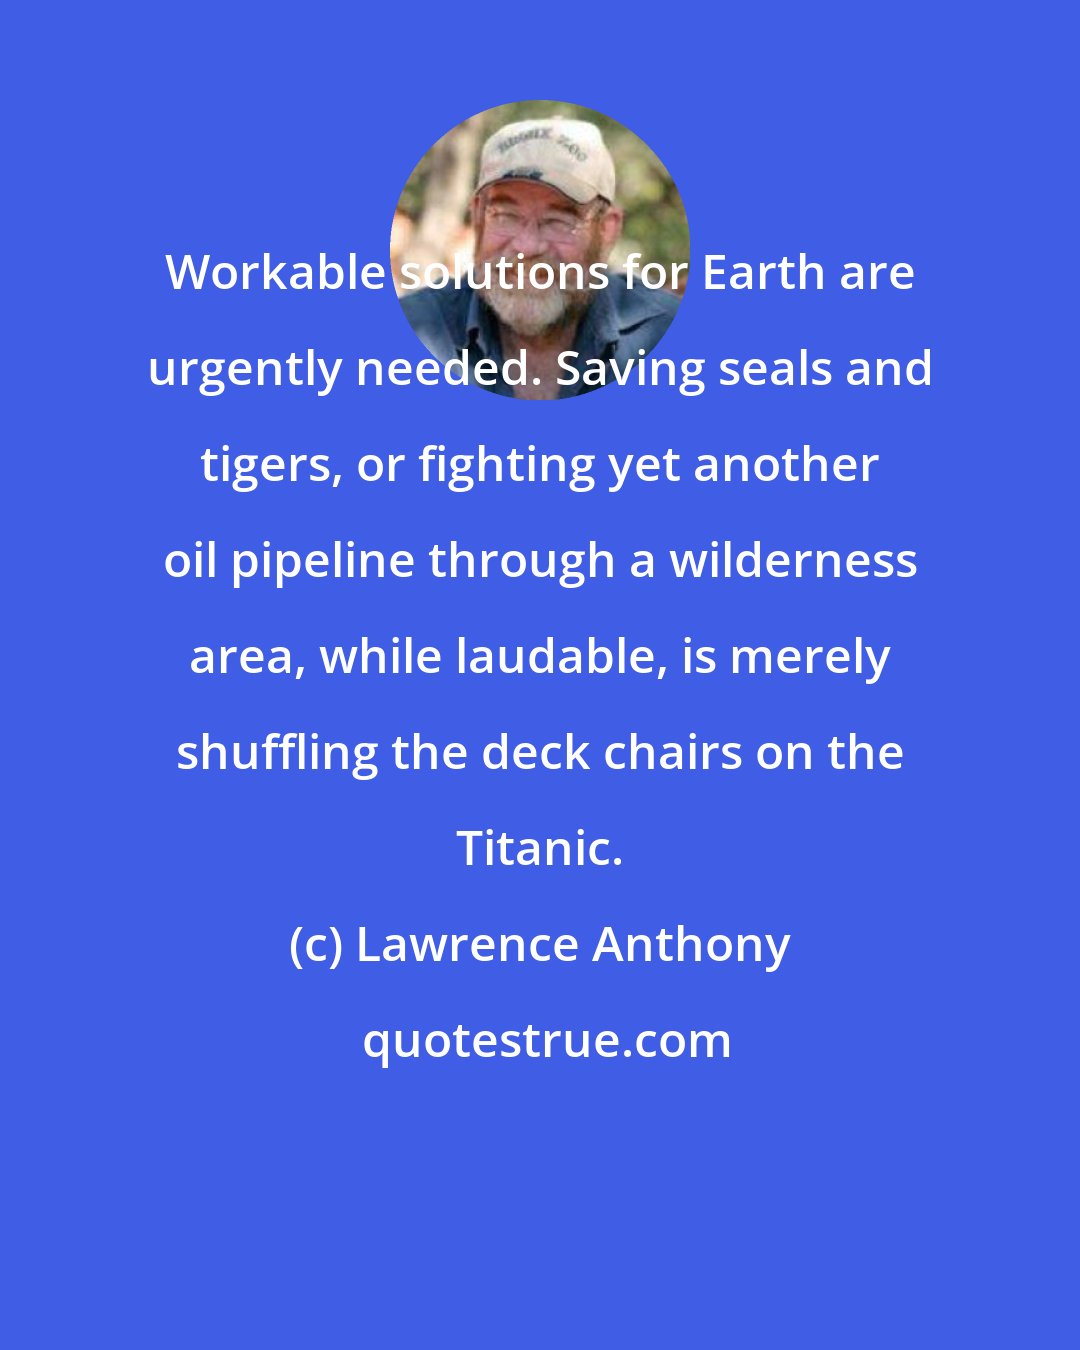 Lawrence Anthony: Workable solutions for Earth are urgently needed. Saving seals and tigers, or fighting yet another oil pipeline through a wilderness area, while laudable, is merely shuffling the deck chairs on the Titanic.